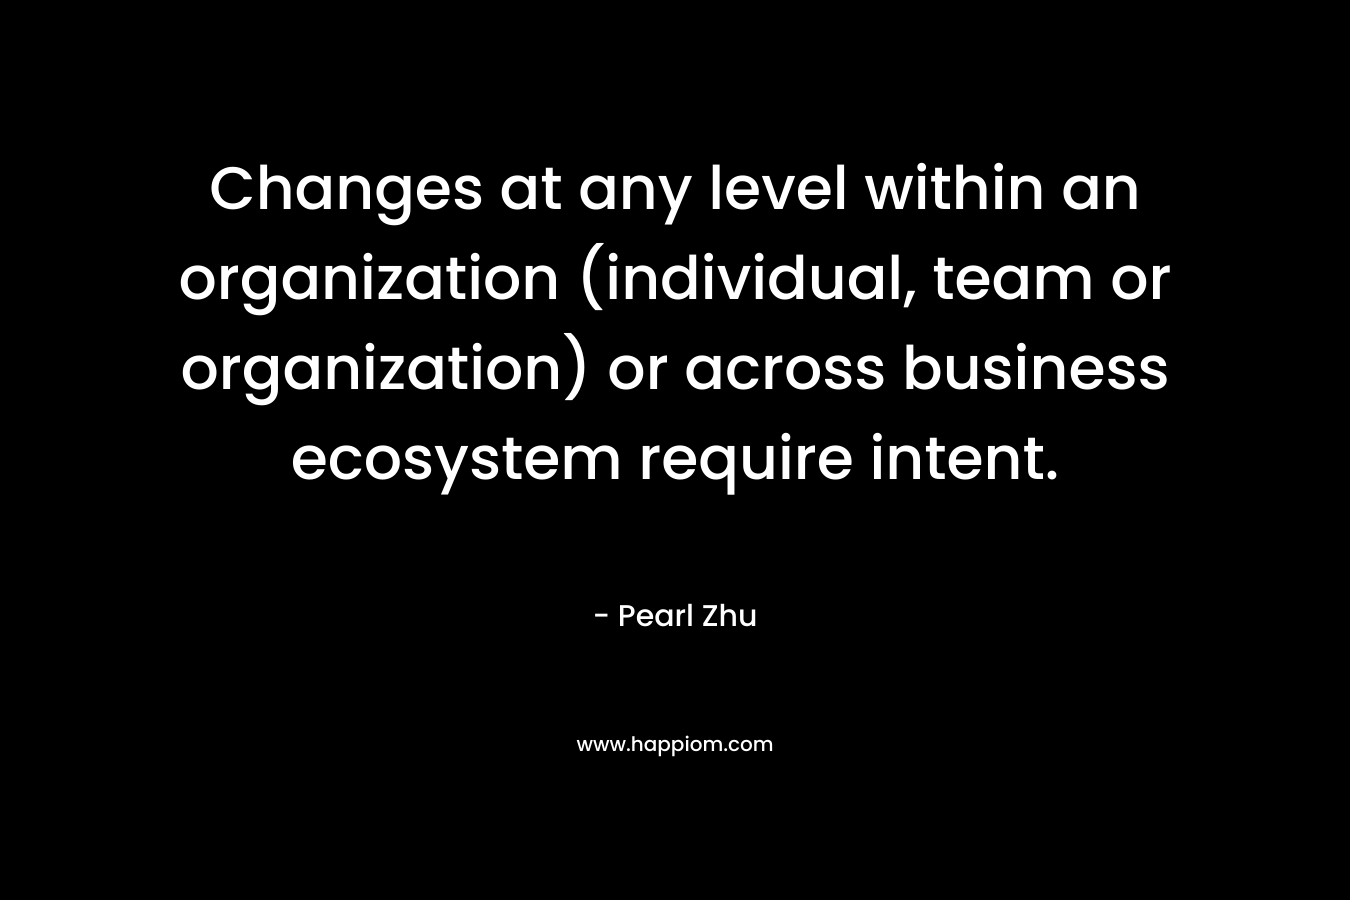 Changes at any level within an organization (individual, team or organization) or across business ecosystem require intent.